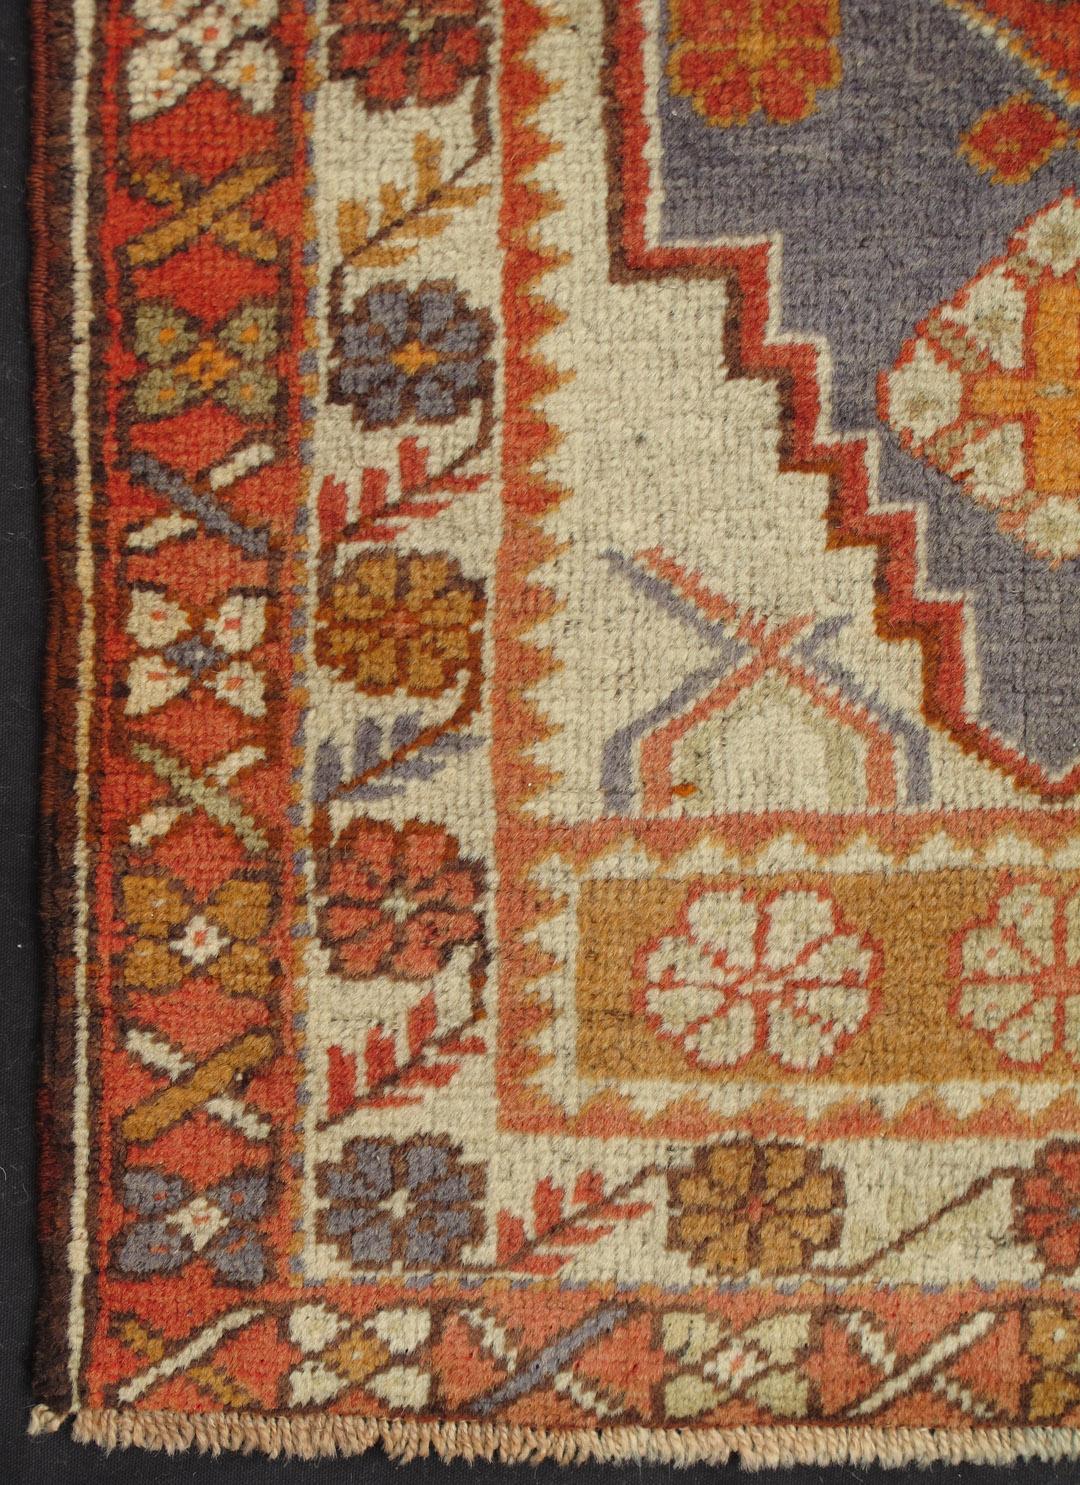 Hand-Knotted Antique Oushak Turkish Rug from Turkey in Burnt Red, Orange and Muted Grey Blue For Sale